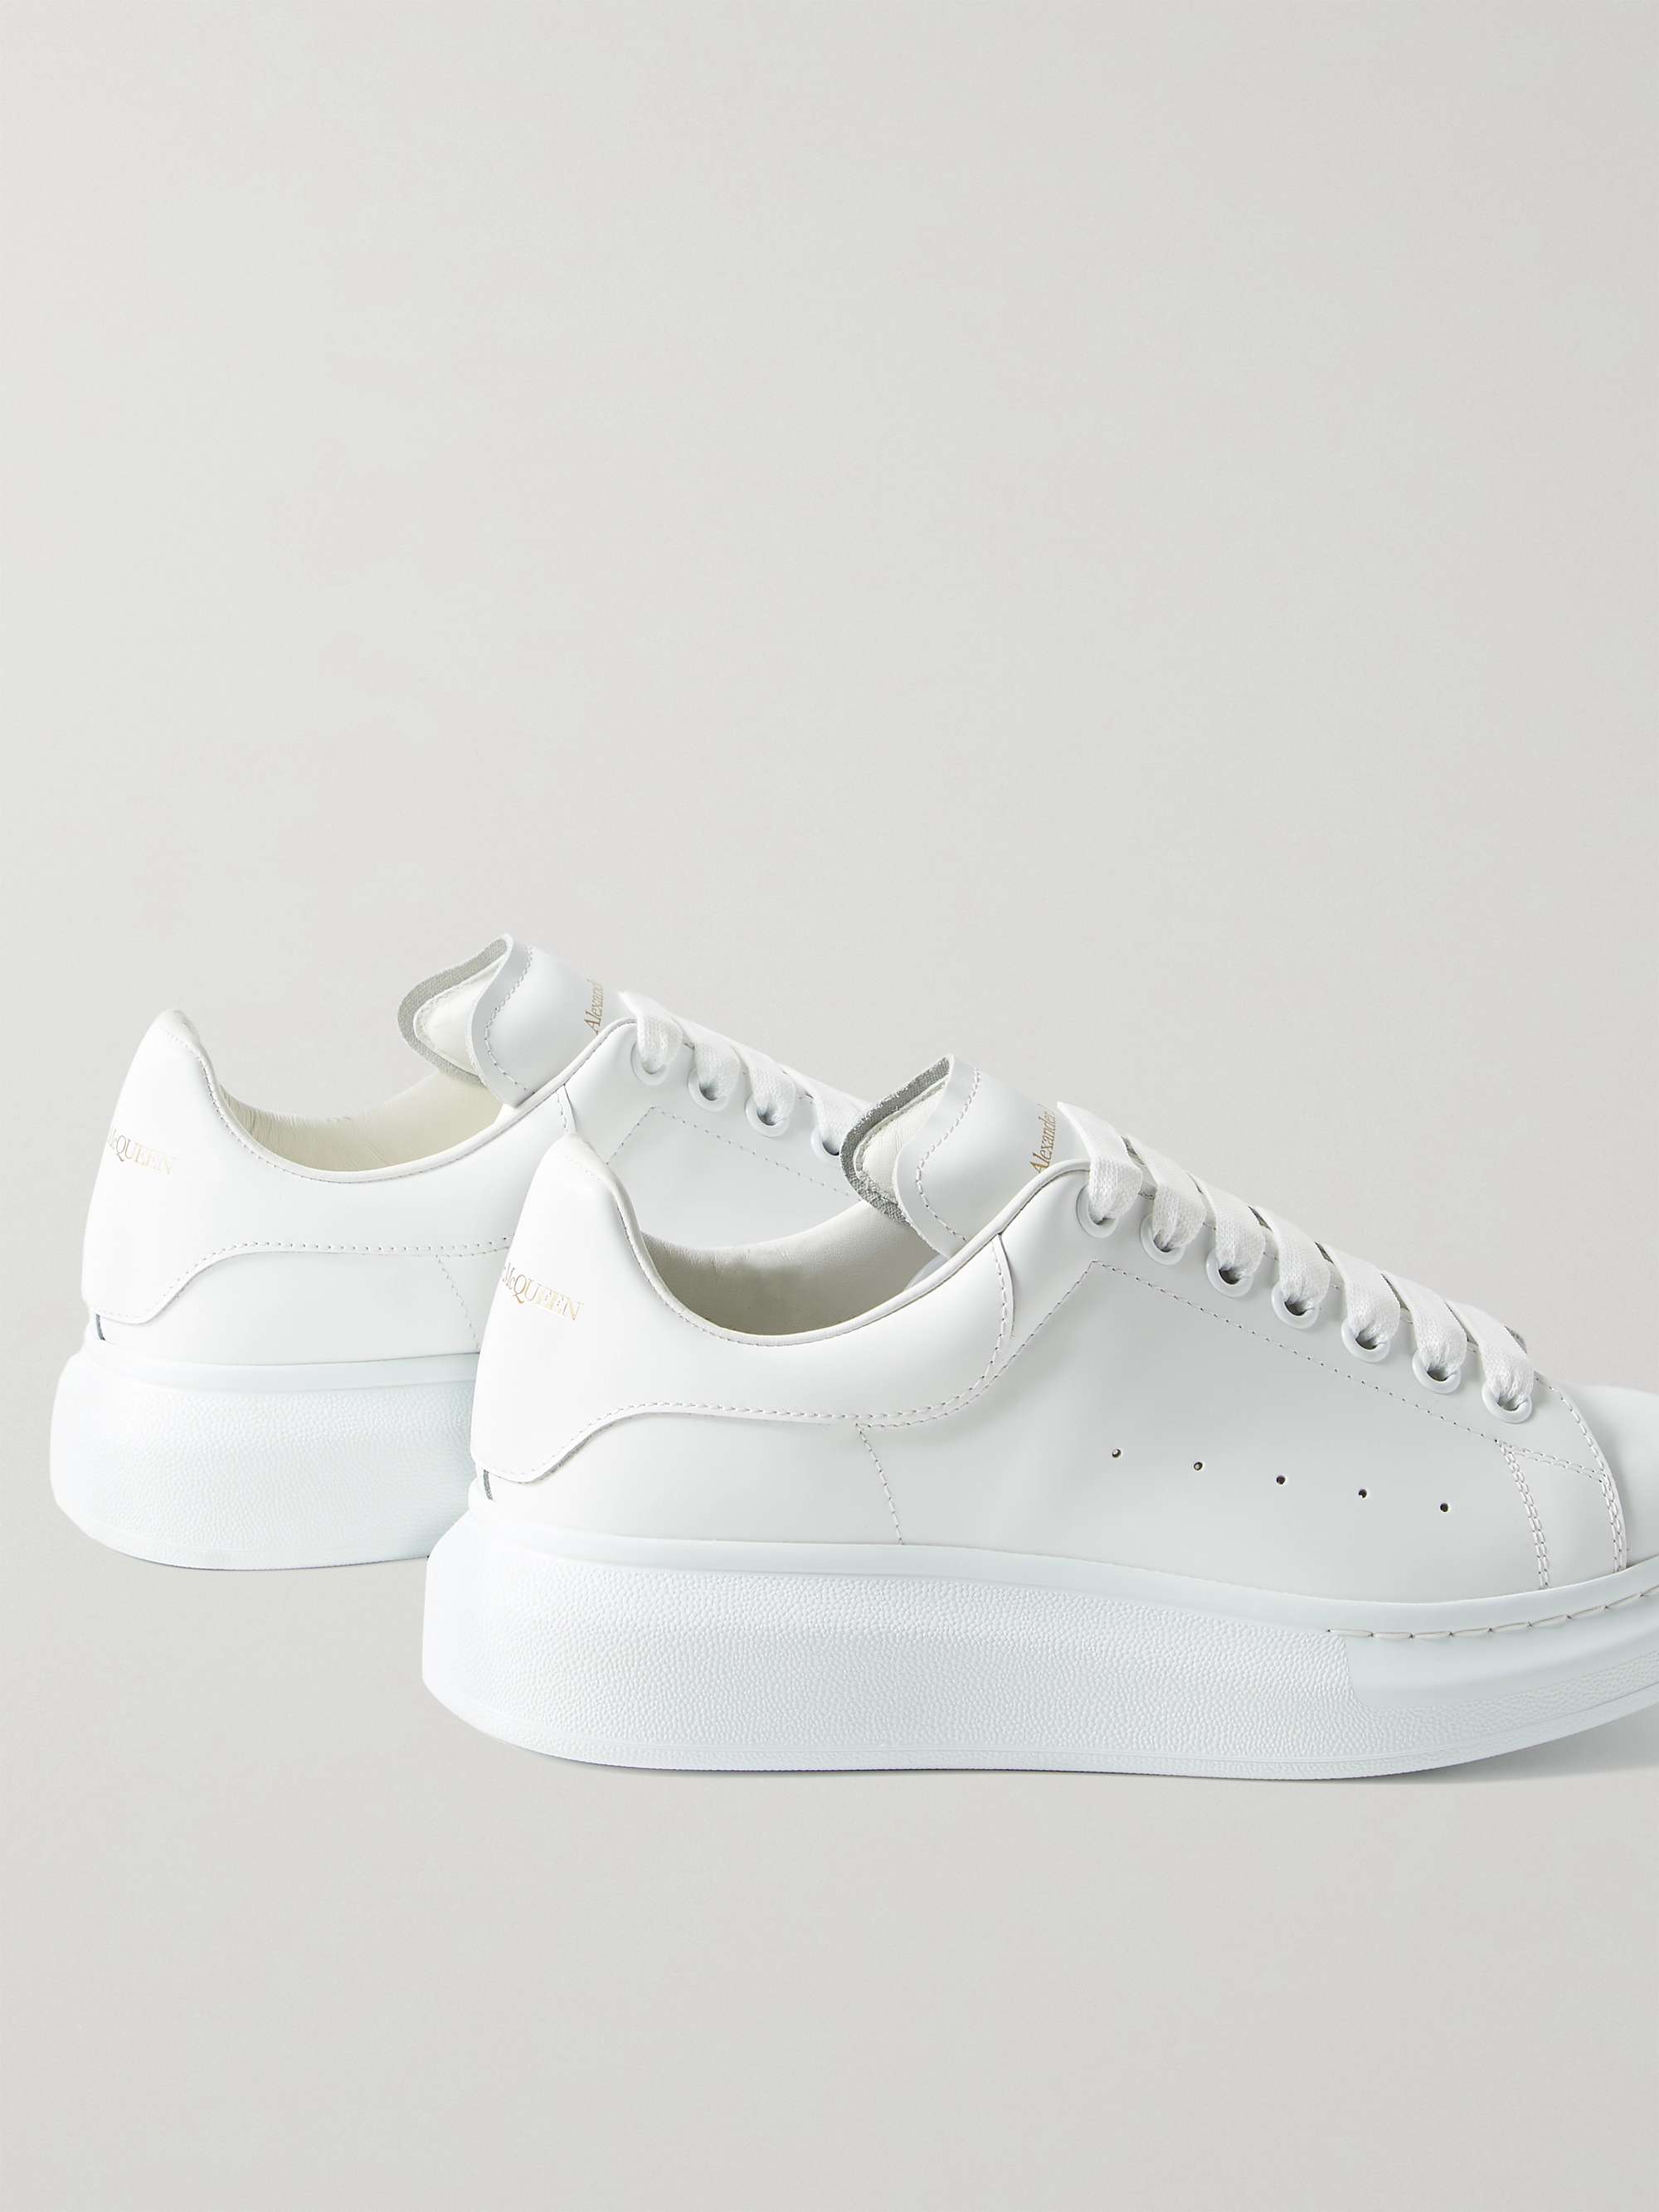 ALEXANDER MCQUEEN Exaggerated-Sole Leather Sneakers